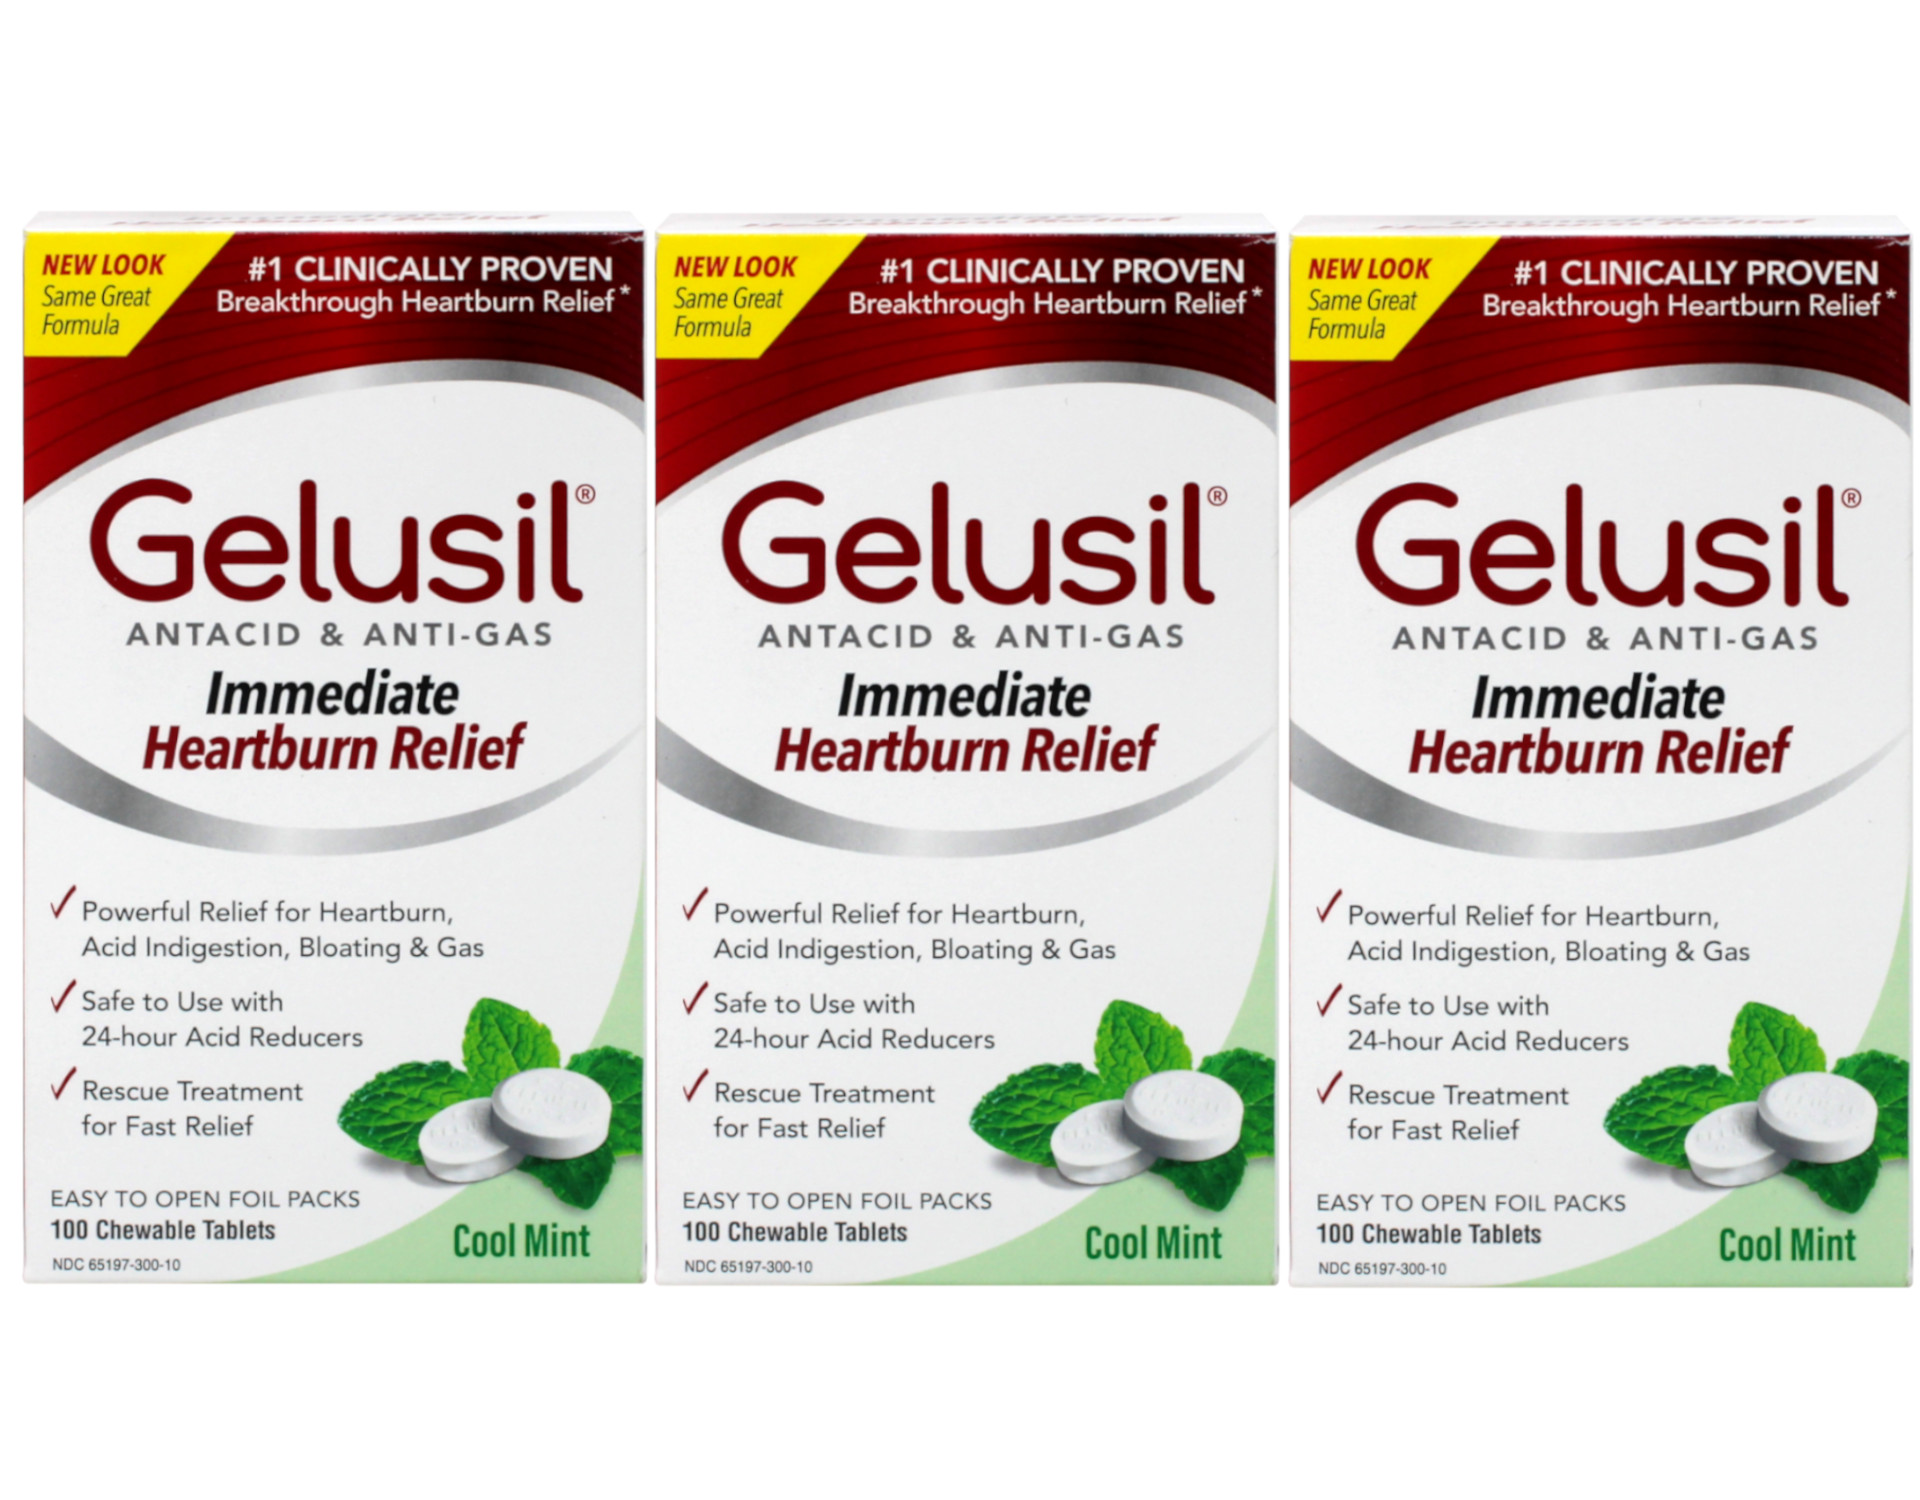 Gelusil Antacid/Anti-Gas Tablets Cool Mint, 100 Tablets (Pack of 3) - image 1 of 5